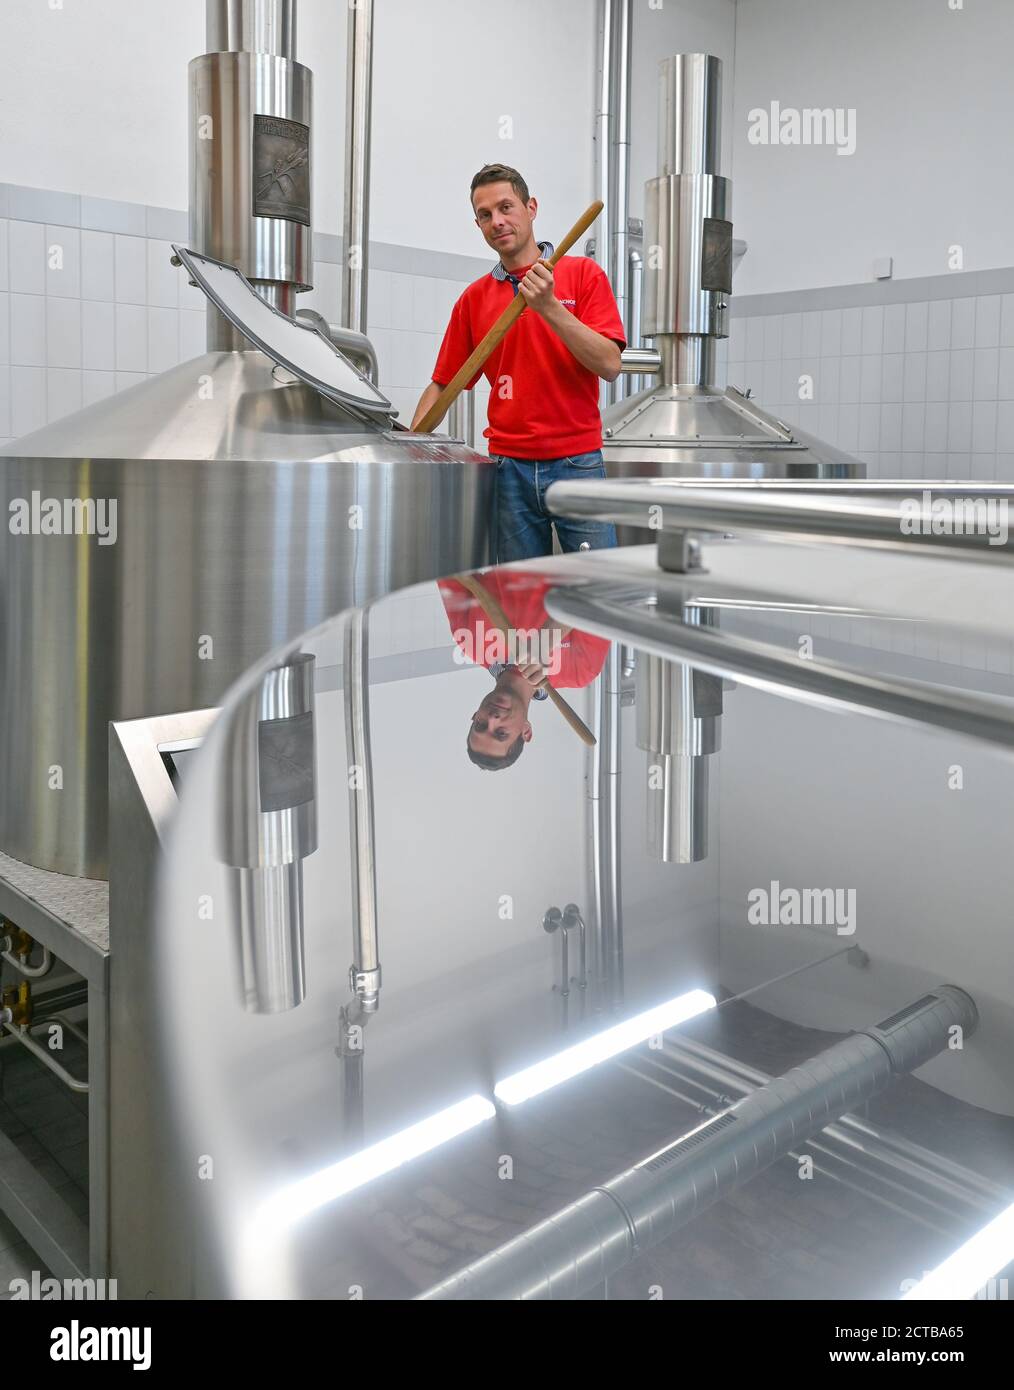 Bernau, Germany. 21st Sep, 2020. Ruslan Hofmann, brewing engineer from the Erste Bernauer Braugenossenschaft e.G. stands between the brewing and fermentation tanks in the brewery in the Börnicke district. Bernau was once famous for its black beer. A good 100 years ago, that ended - until now. The newly founded First Bernau Brewery Cooperative and the town benefit from each other on the old Börnicke estate. And the regional brew goes down well, just like in the old days. Credit: Patrick Pleul/dpa-Zentralbild/ZB/dpa/Alamy Live News Stock Photo